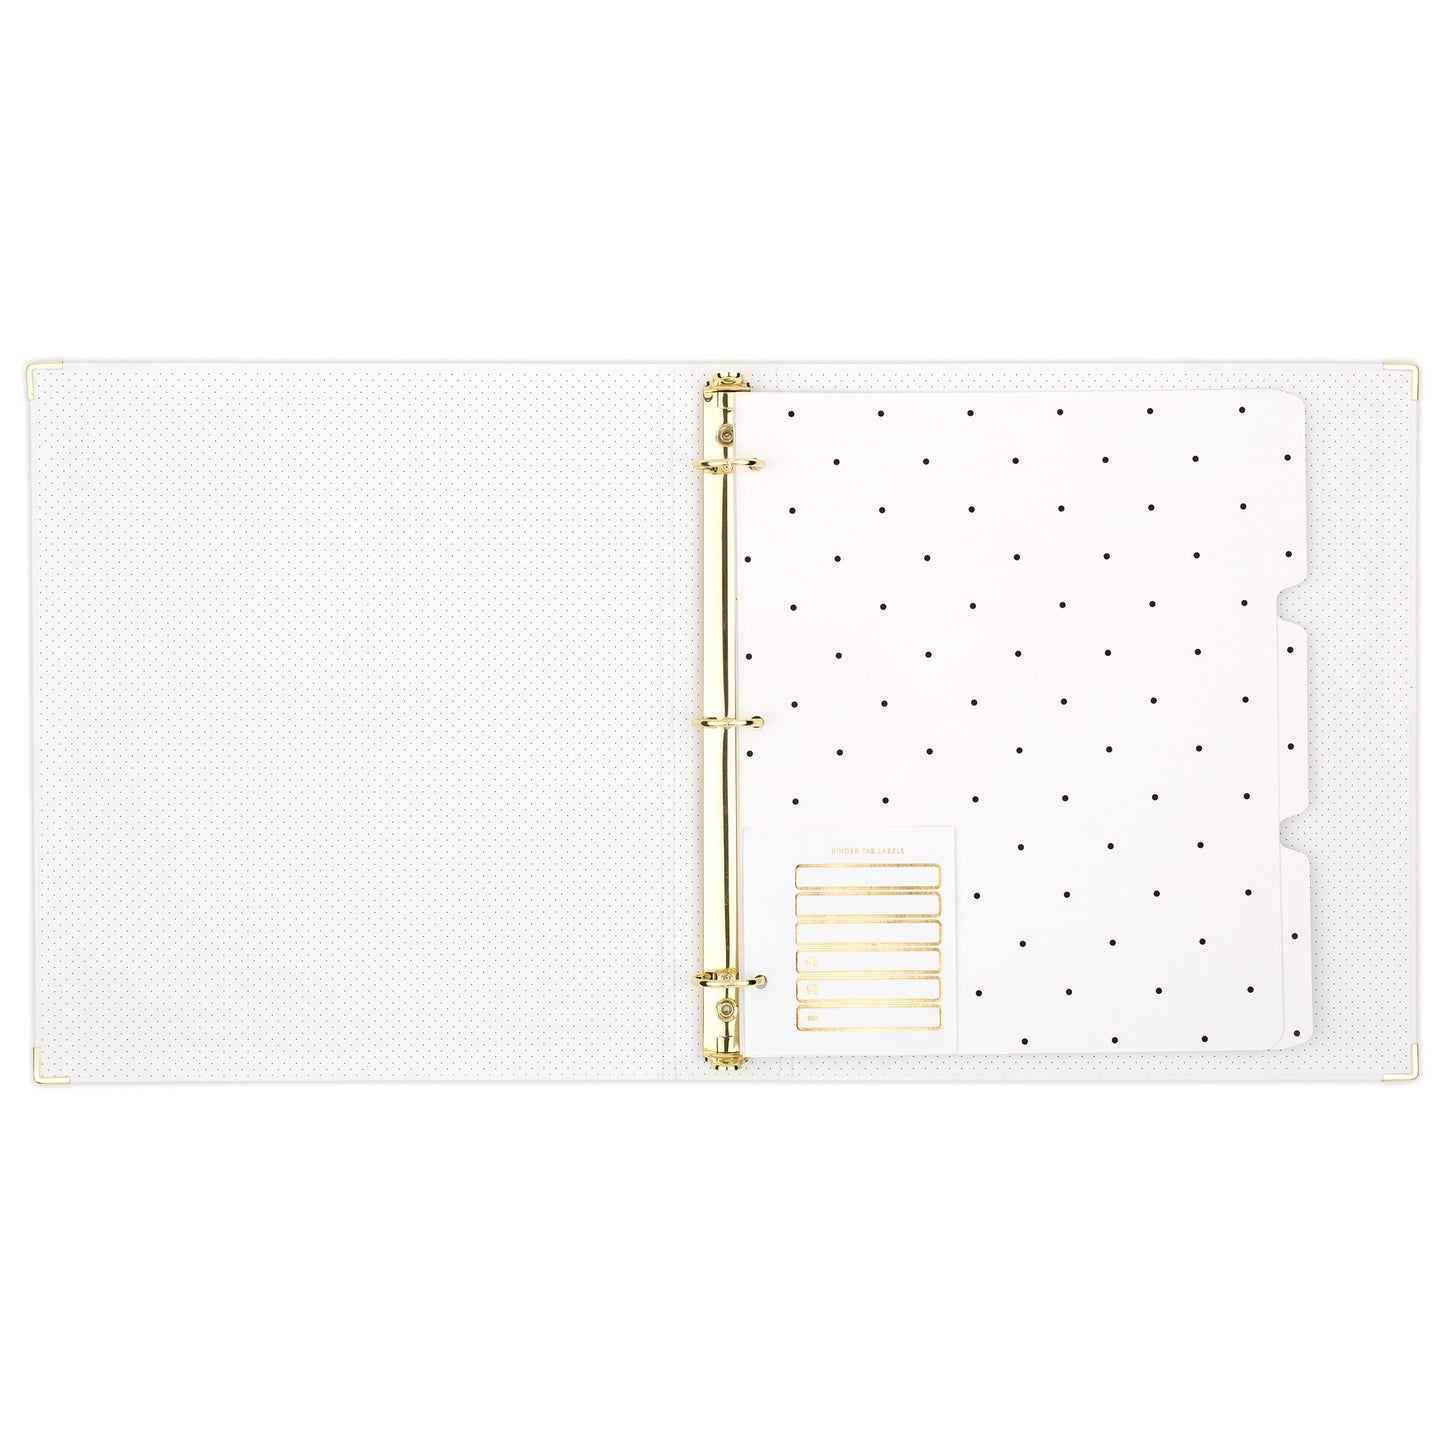 open white binder with black dots showing tab dividers